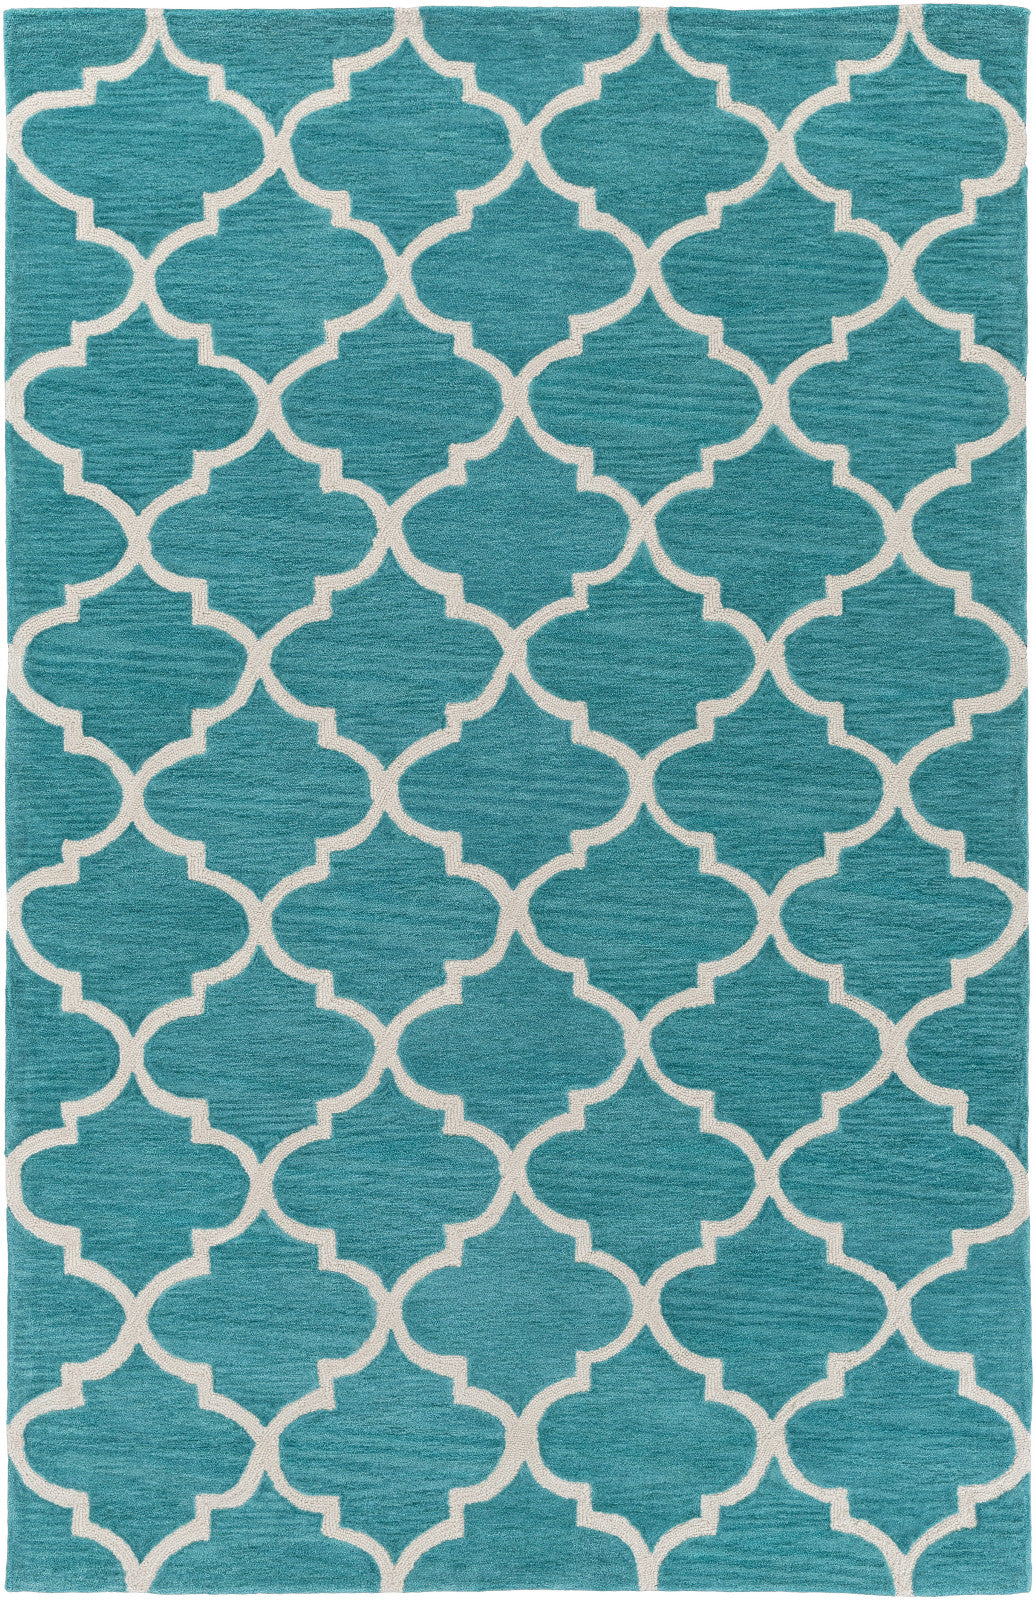 Artistic Weavers Holden Finley Turquoise/Ivory Area Rug main image